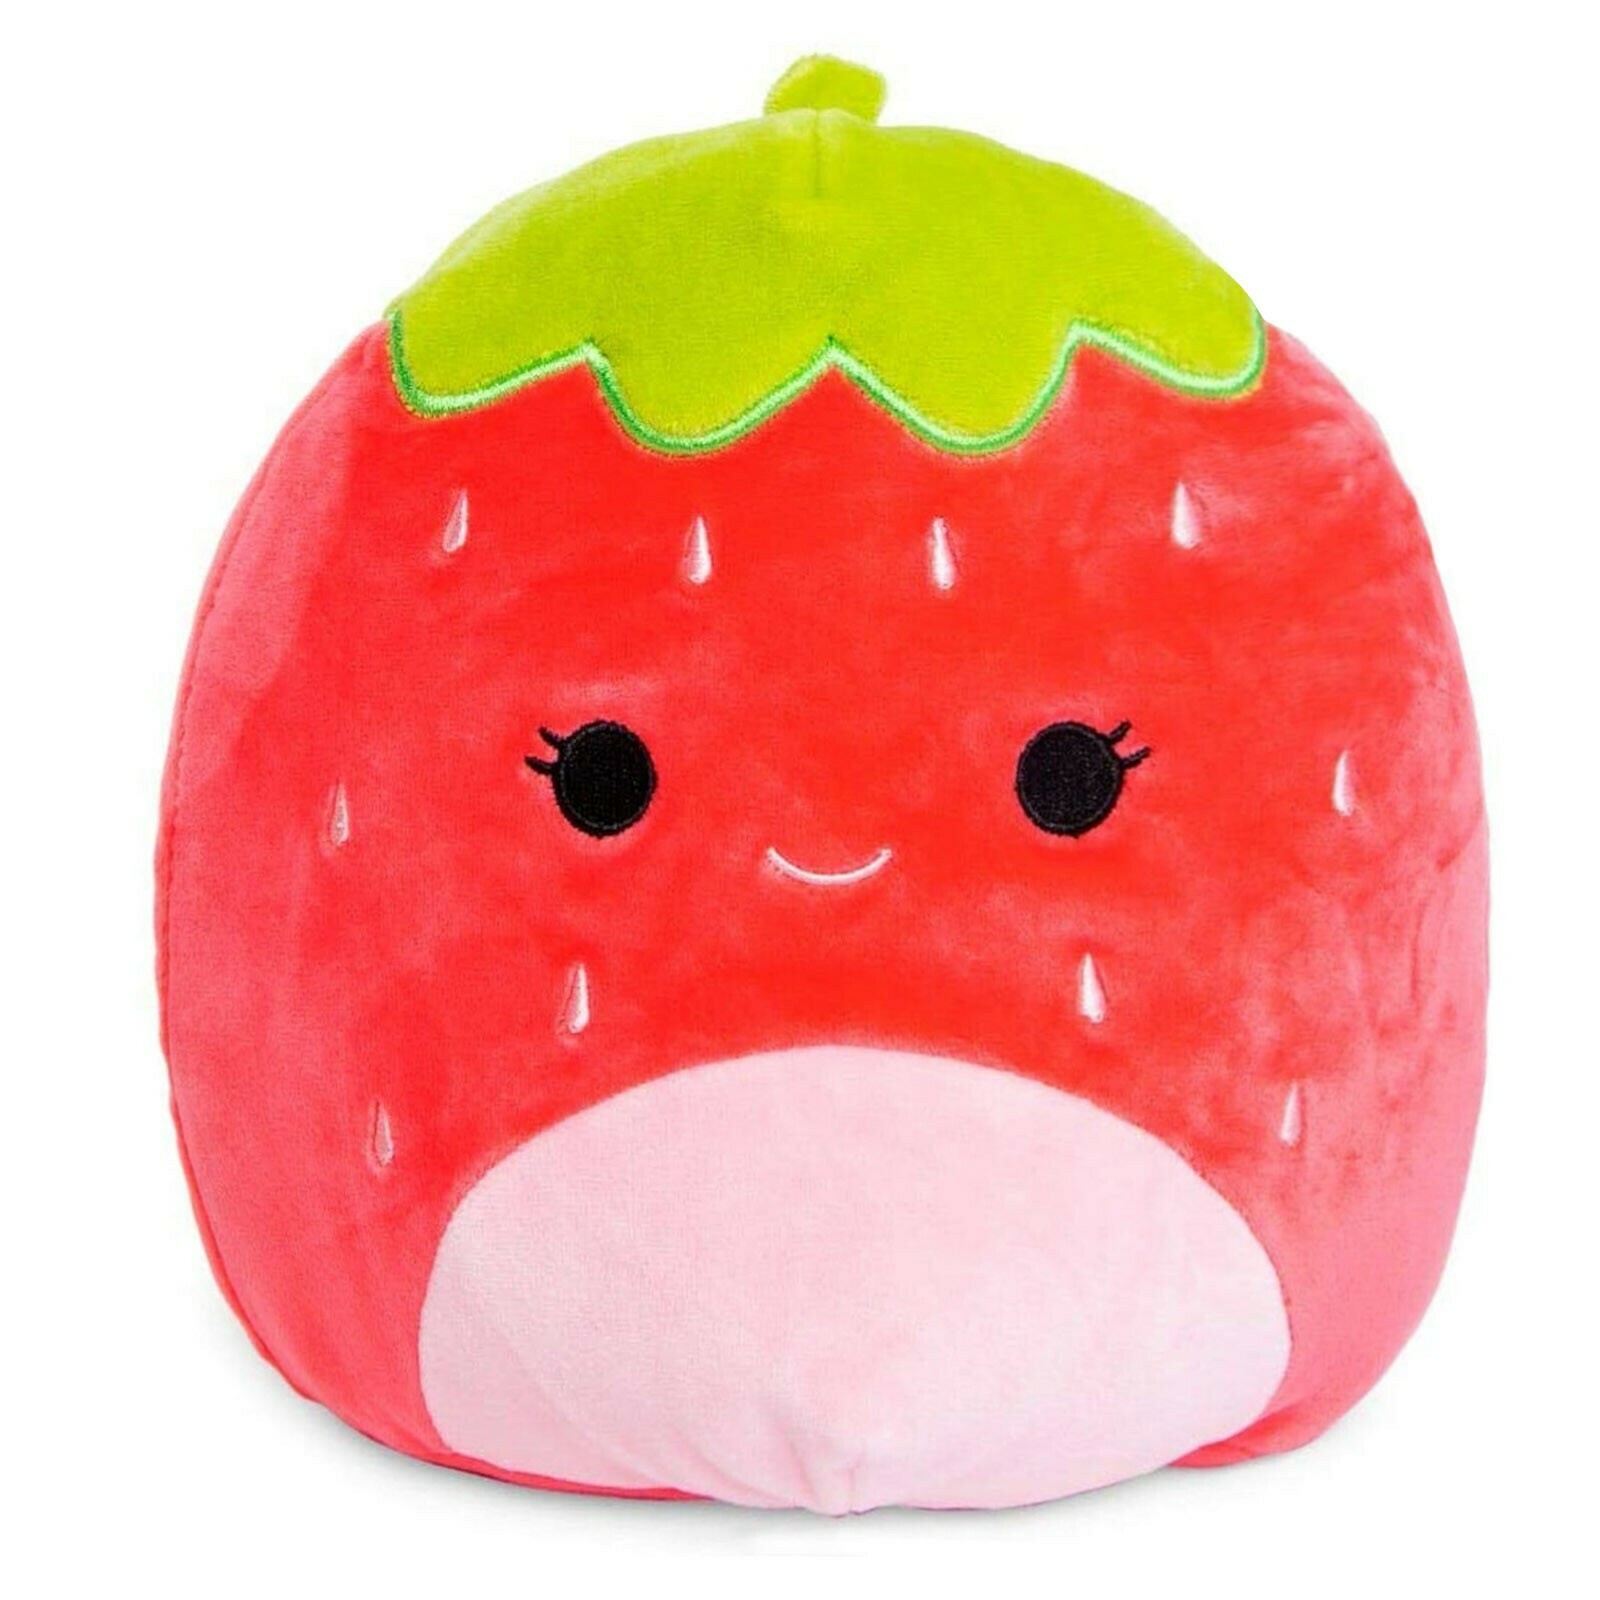 Cat Plushies: 3D Strawberry Pillow (8") - Soft, Cute & Cuddly Fruit Toy